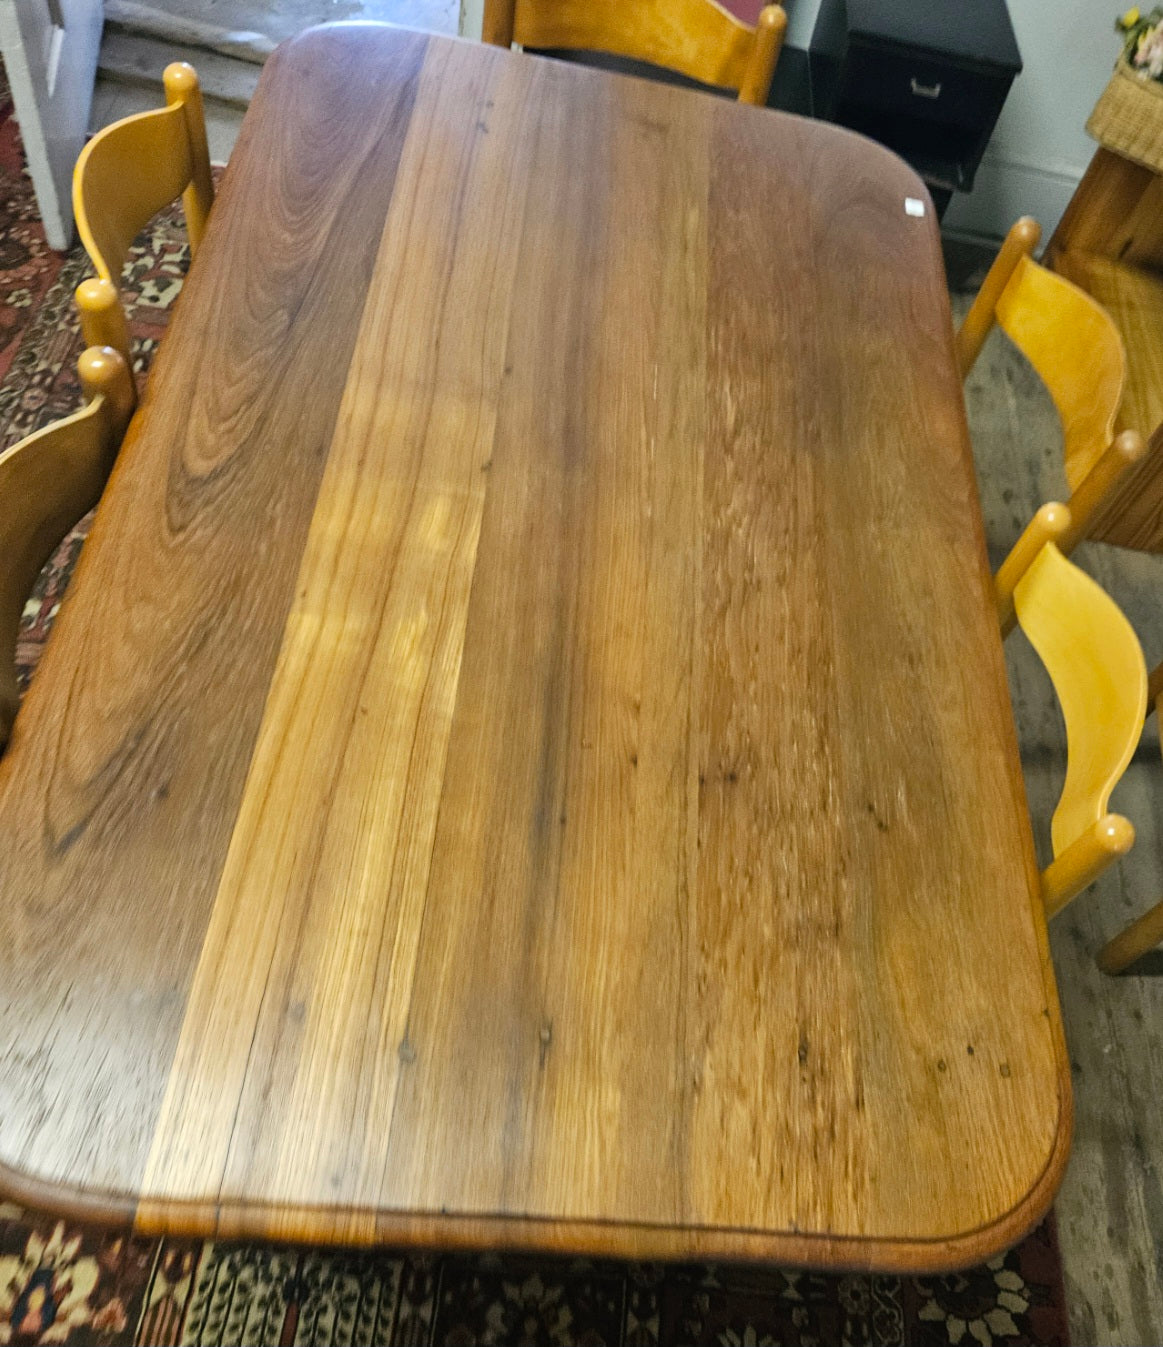 Imbuia dining room table